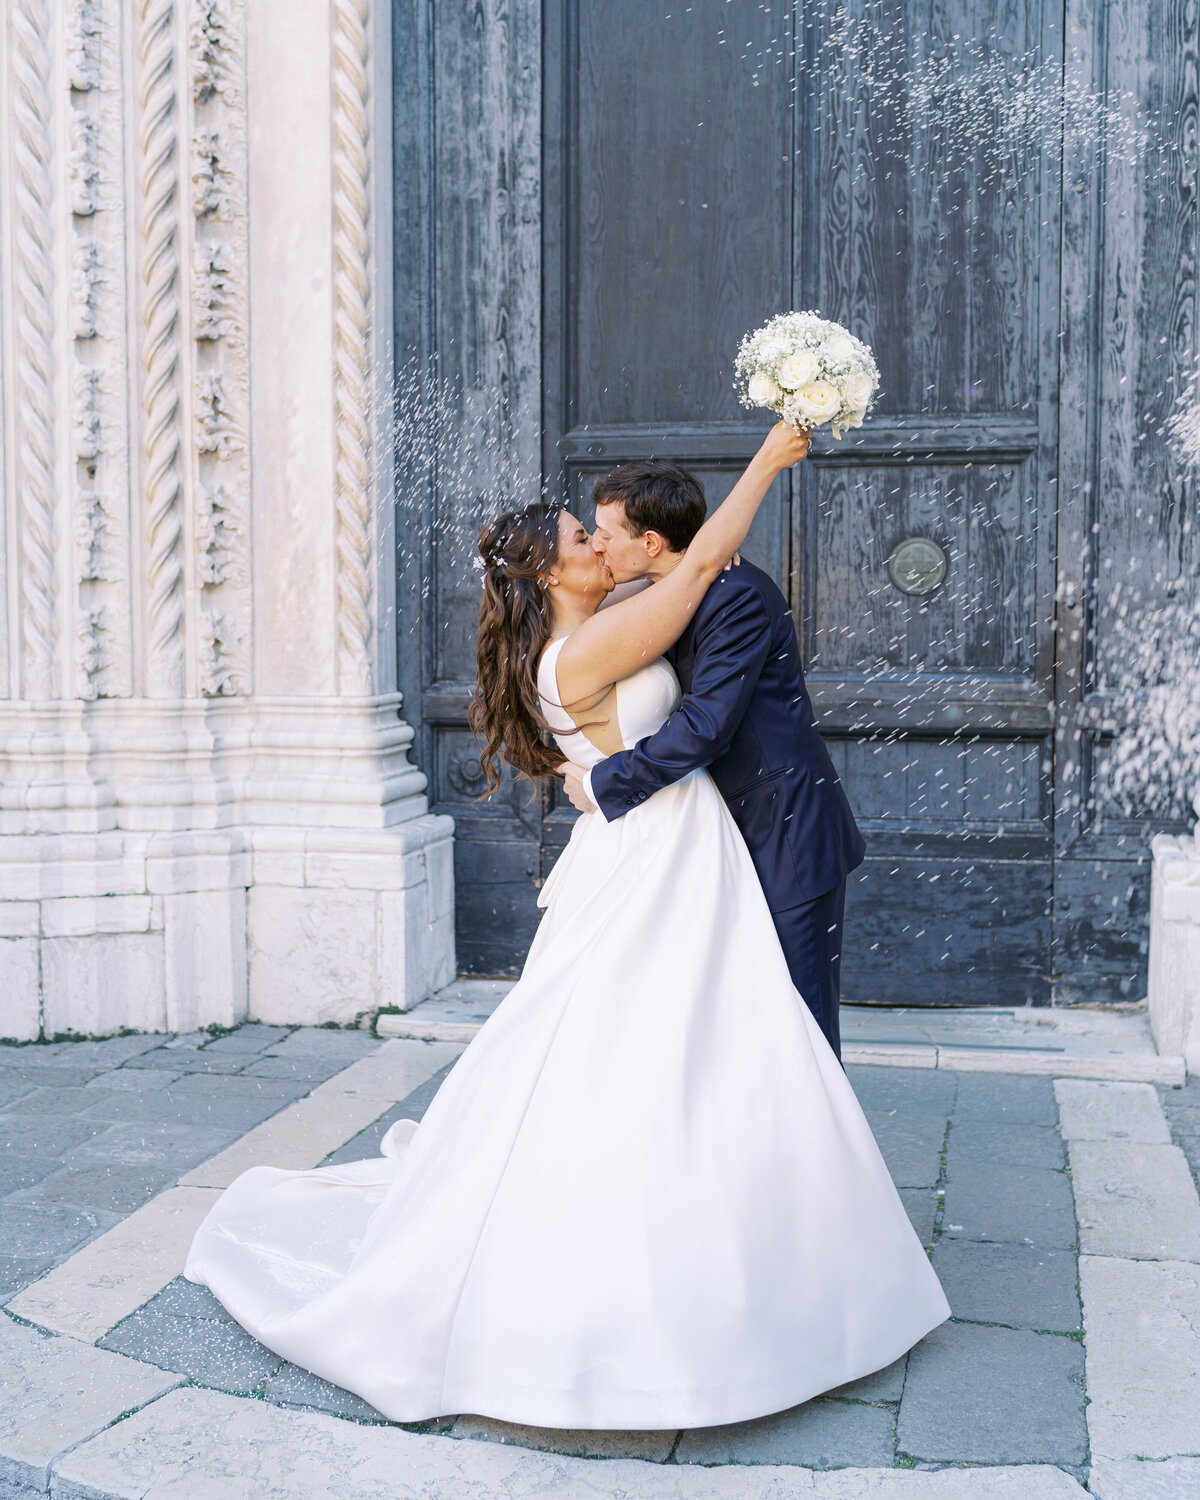 Confetti and kiss after church wedding in Venice